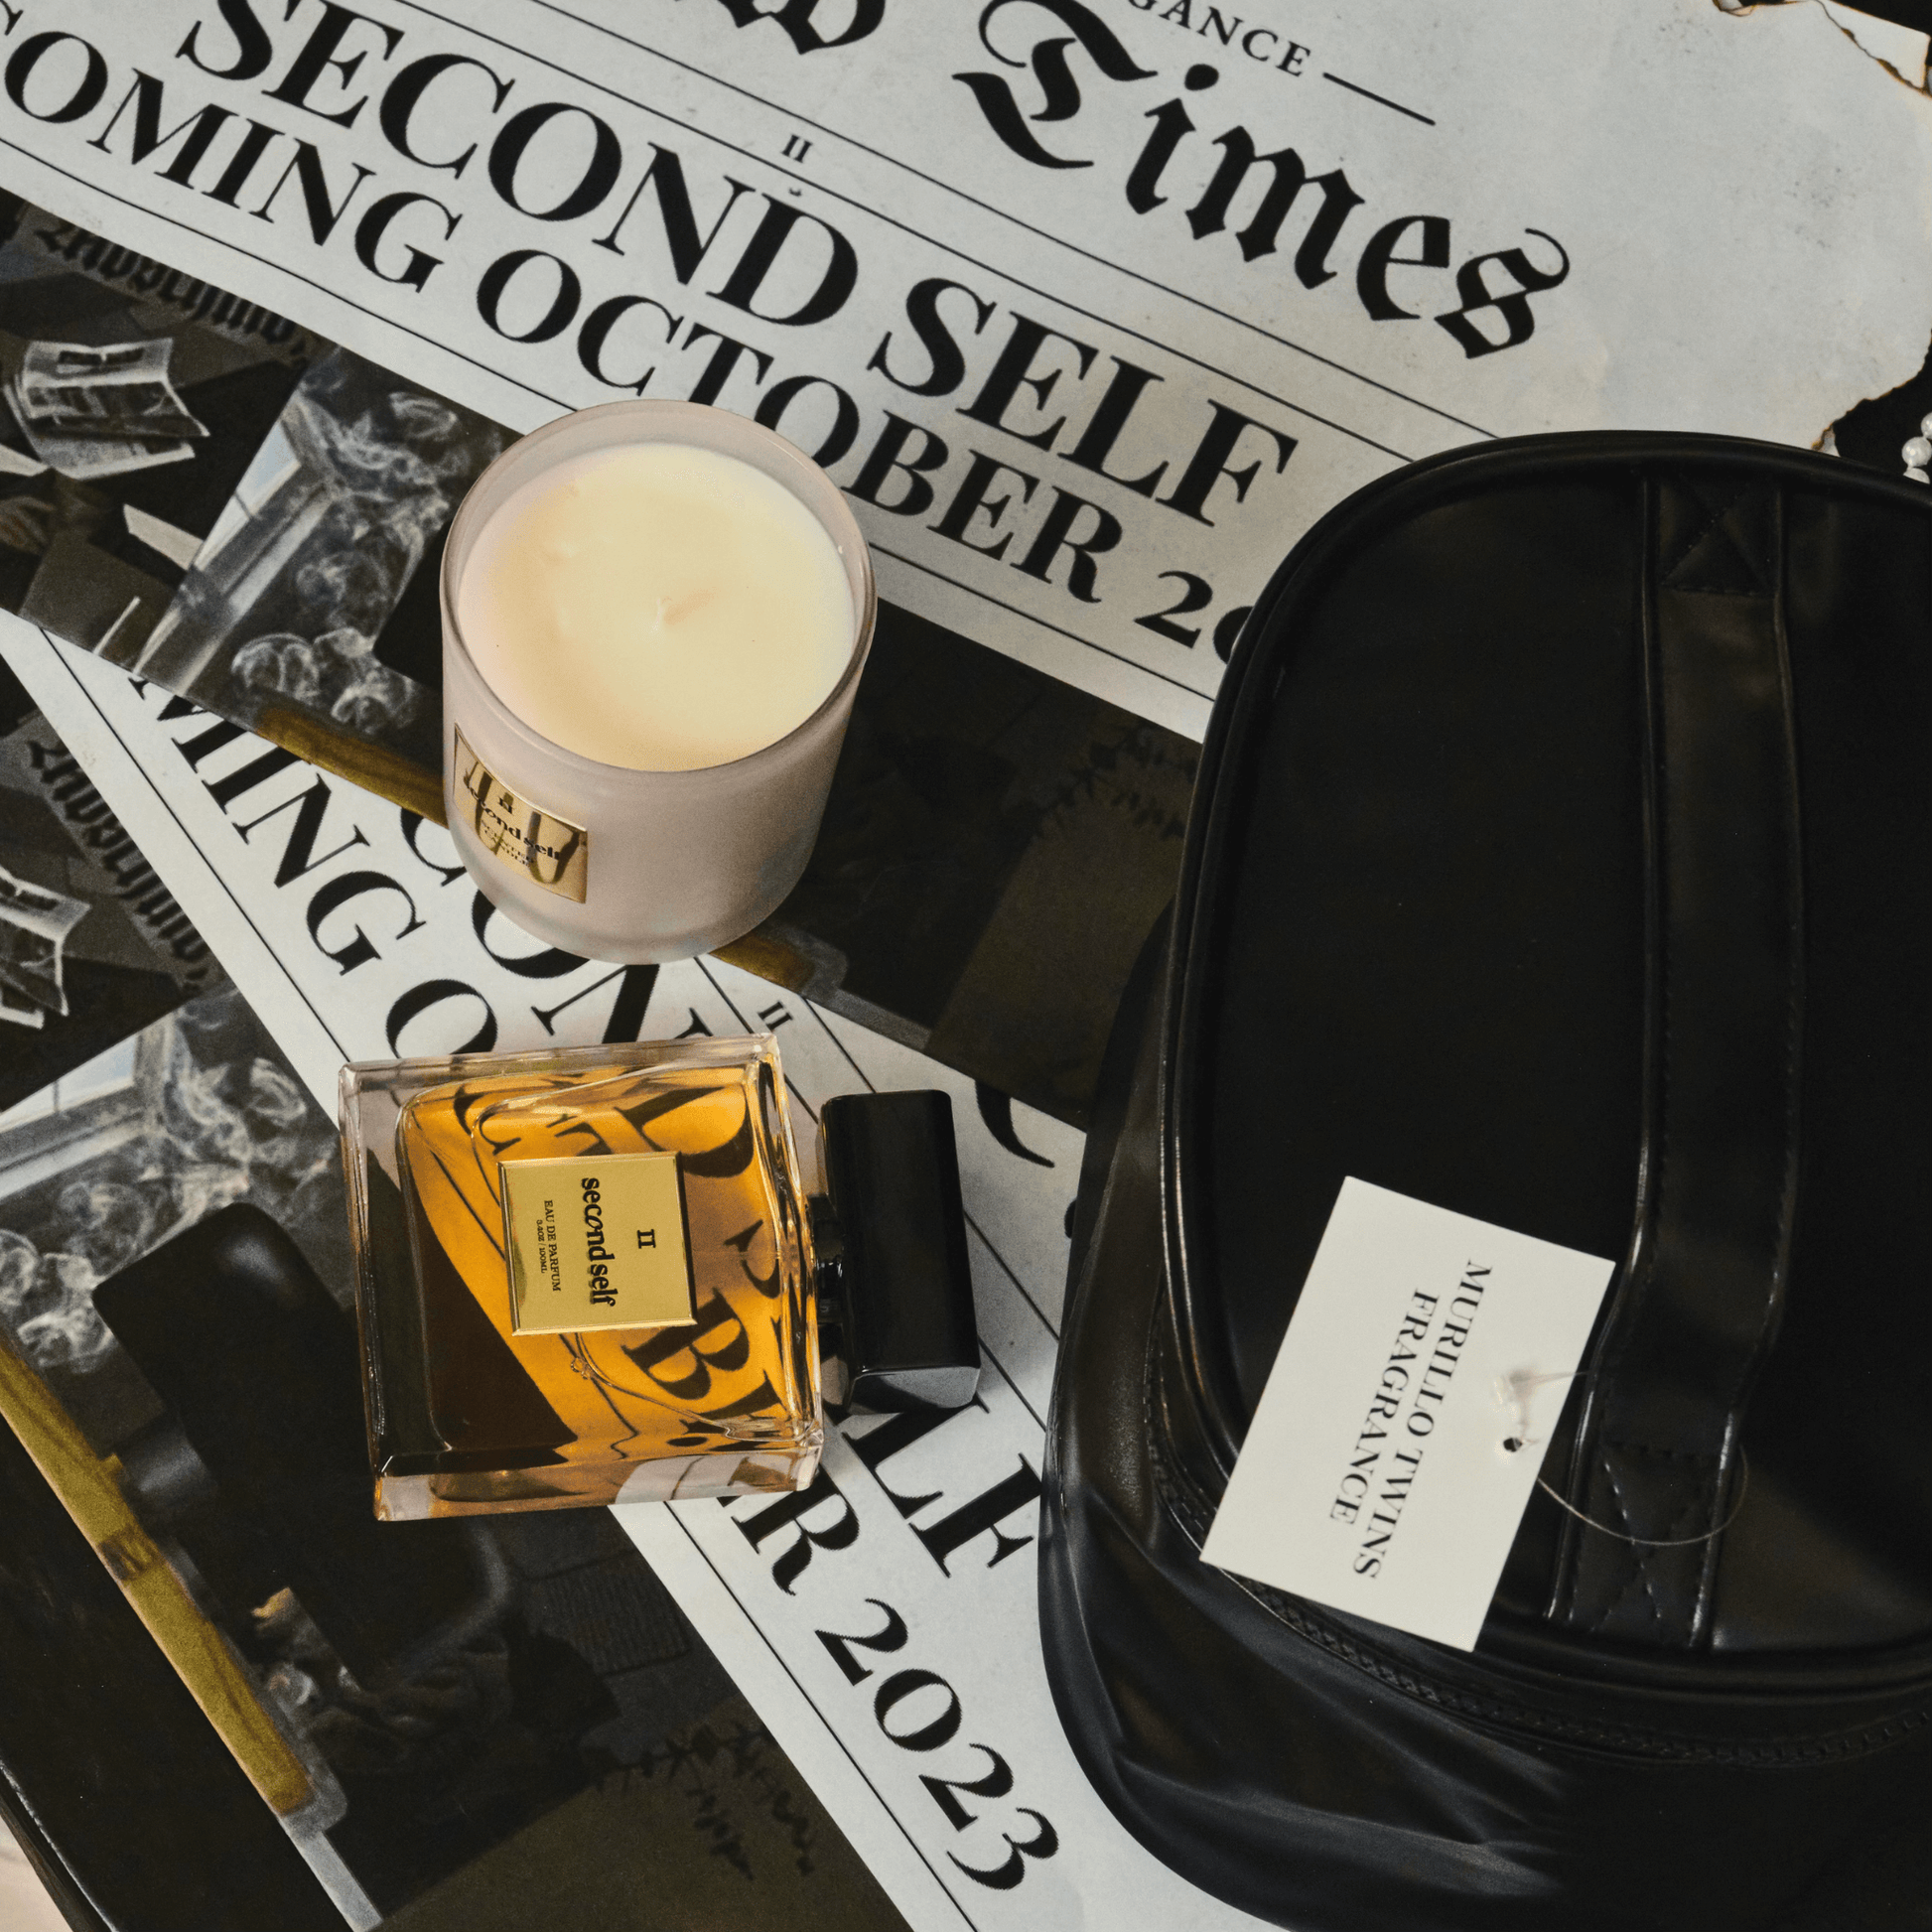 An enticing composition featuring the Second Self fragrance bottle, a luxurious scented candle, and a stylish makeup bag, evoking a sense of sophistication, beauty, and indulgence in one captivating image.